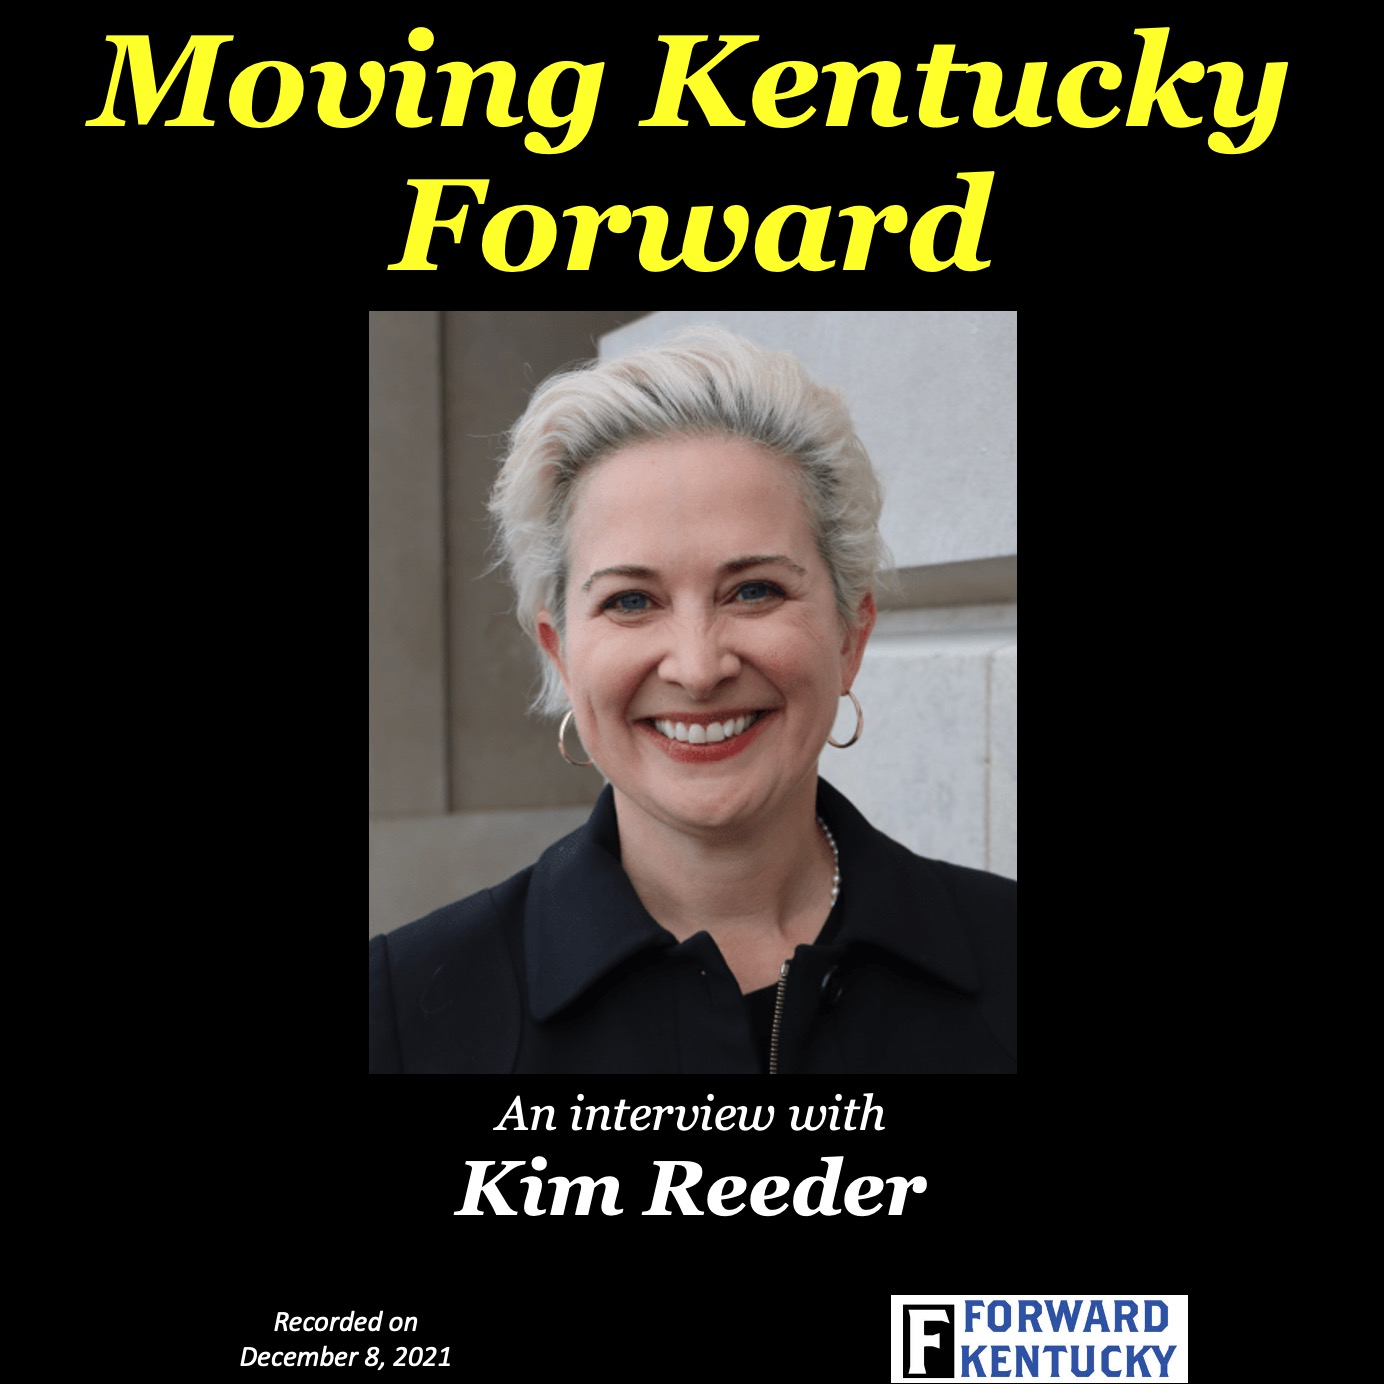 Kim Reeder, an eastern KY success story running for Auditor